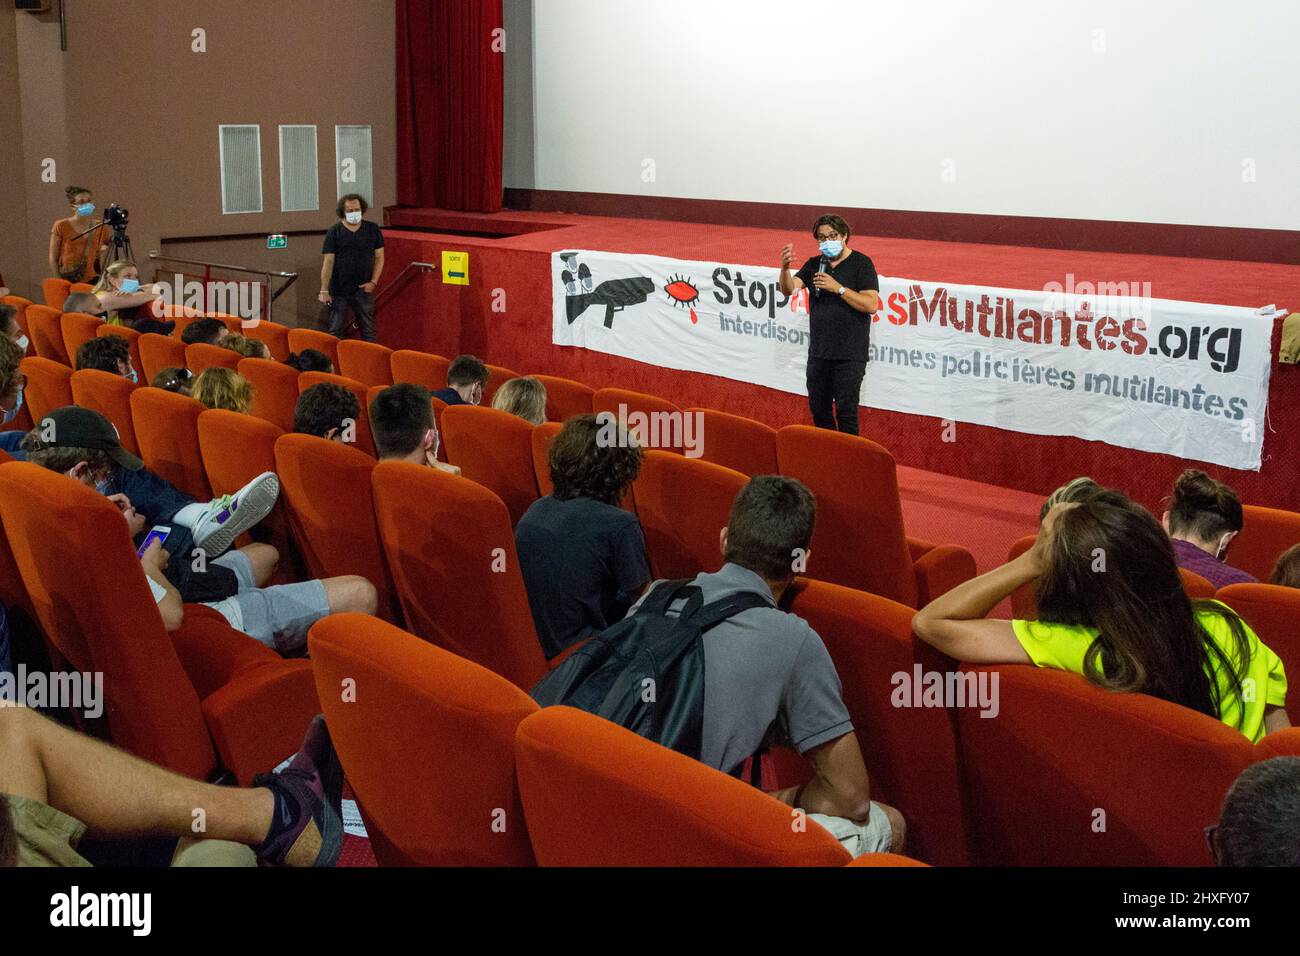 Screening of the documentary 'A country that keeps itself wise' followed by a debate with director David Dufresne at the Diagonal cinema. Debate filmed by La Mule du Pape and recorded by Radio Gi.ne. Montpellier, Occitanie, France Stock Photo